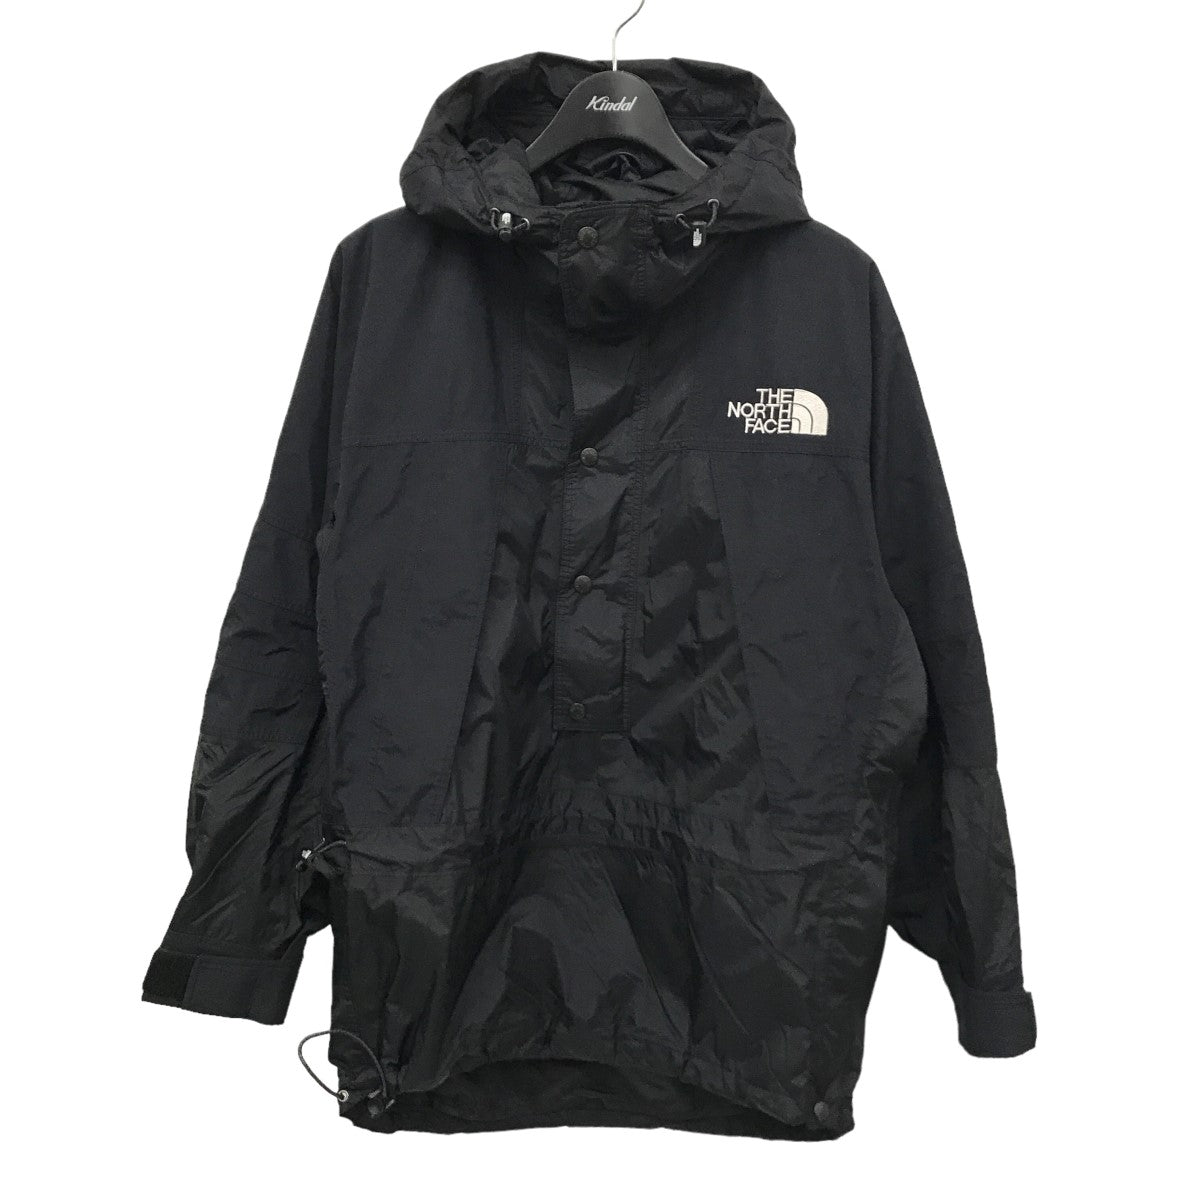 THE NORTH FACE(ザノースフェイス) MOUNTAIN LIGHT PULLOVER JACKET ...